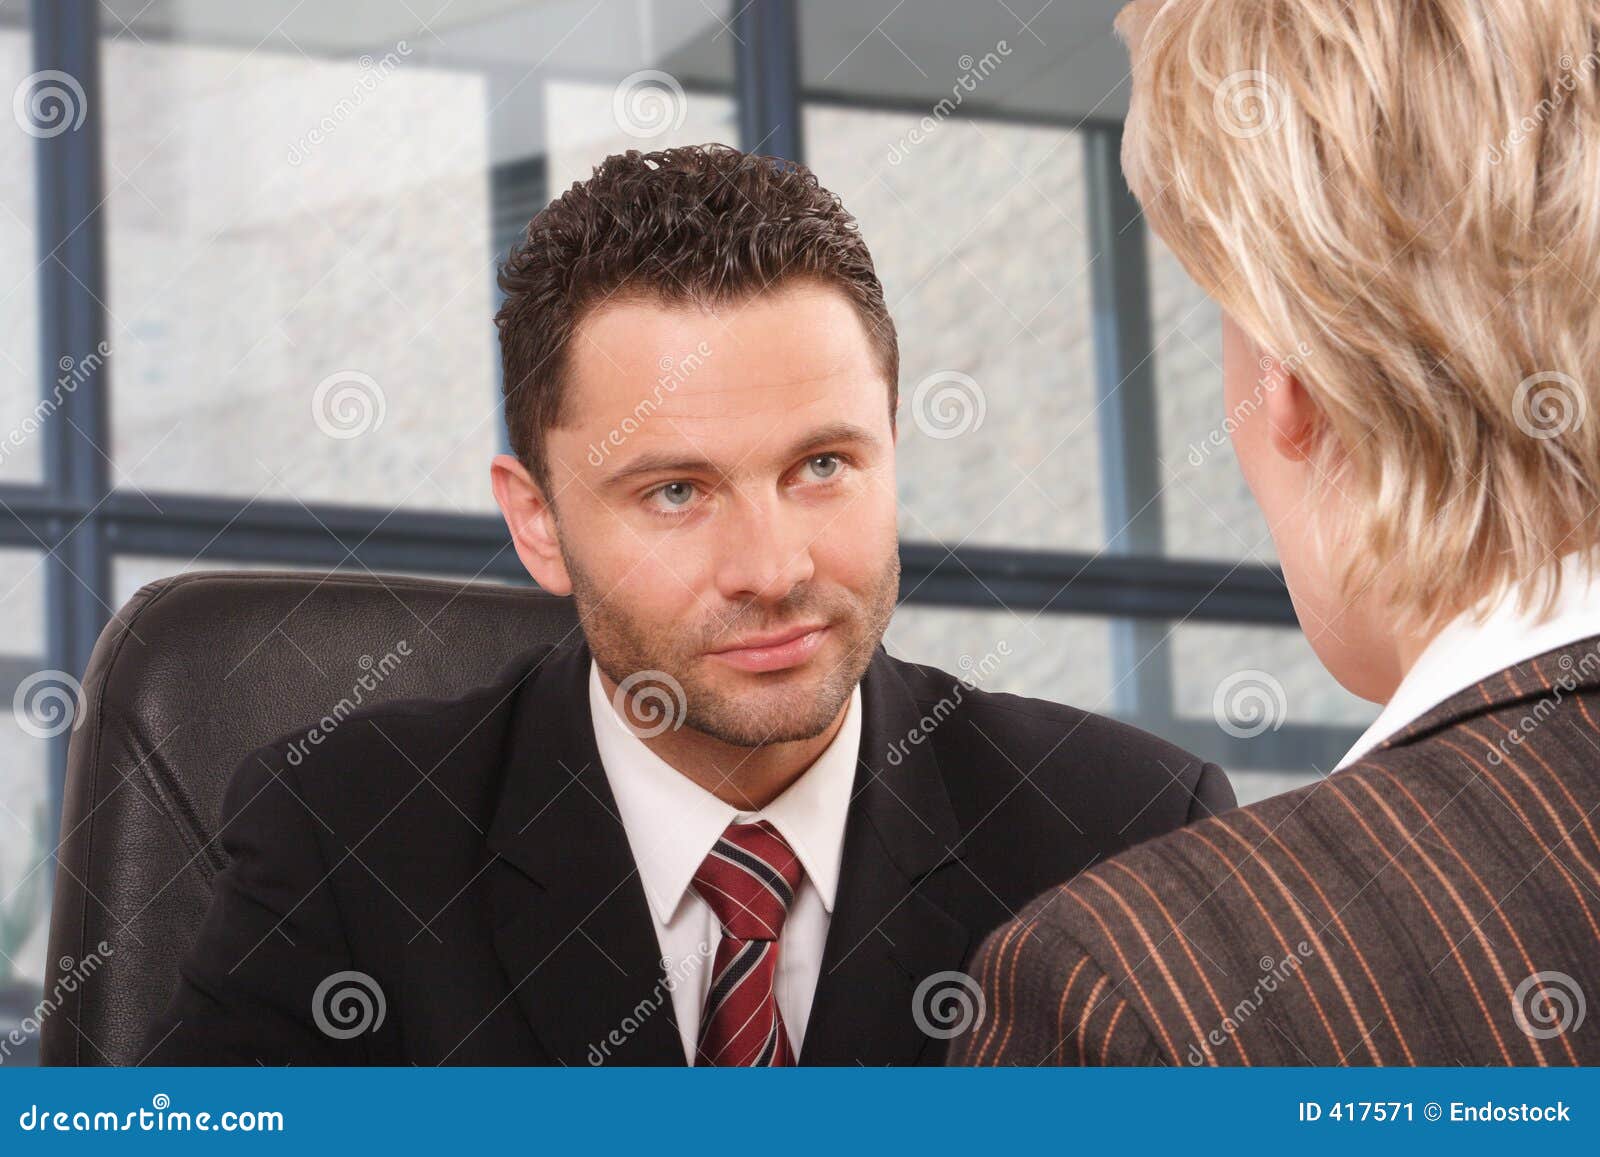 business man and woman talk